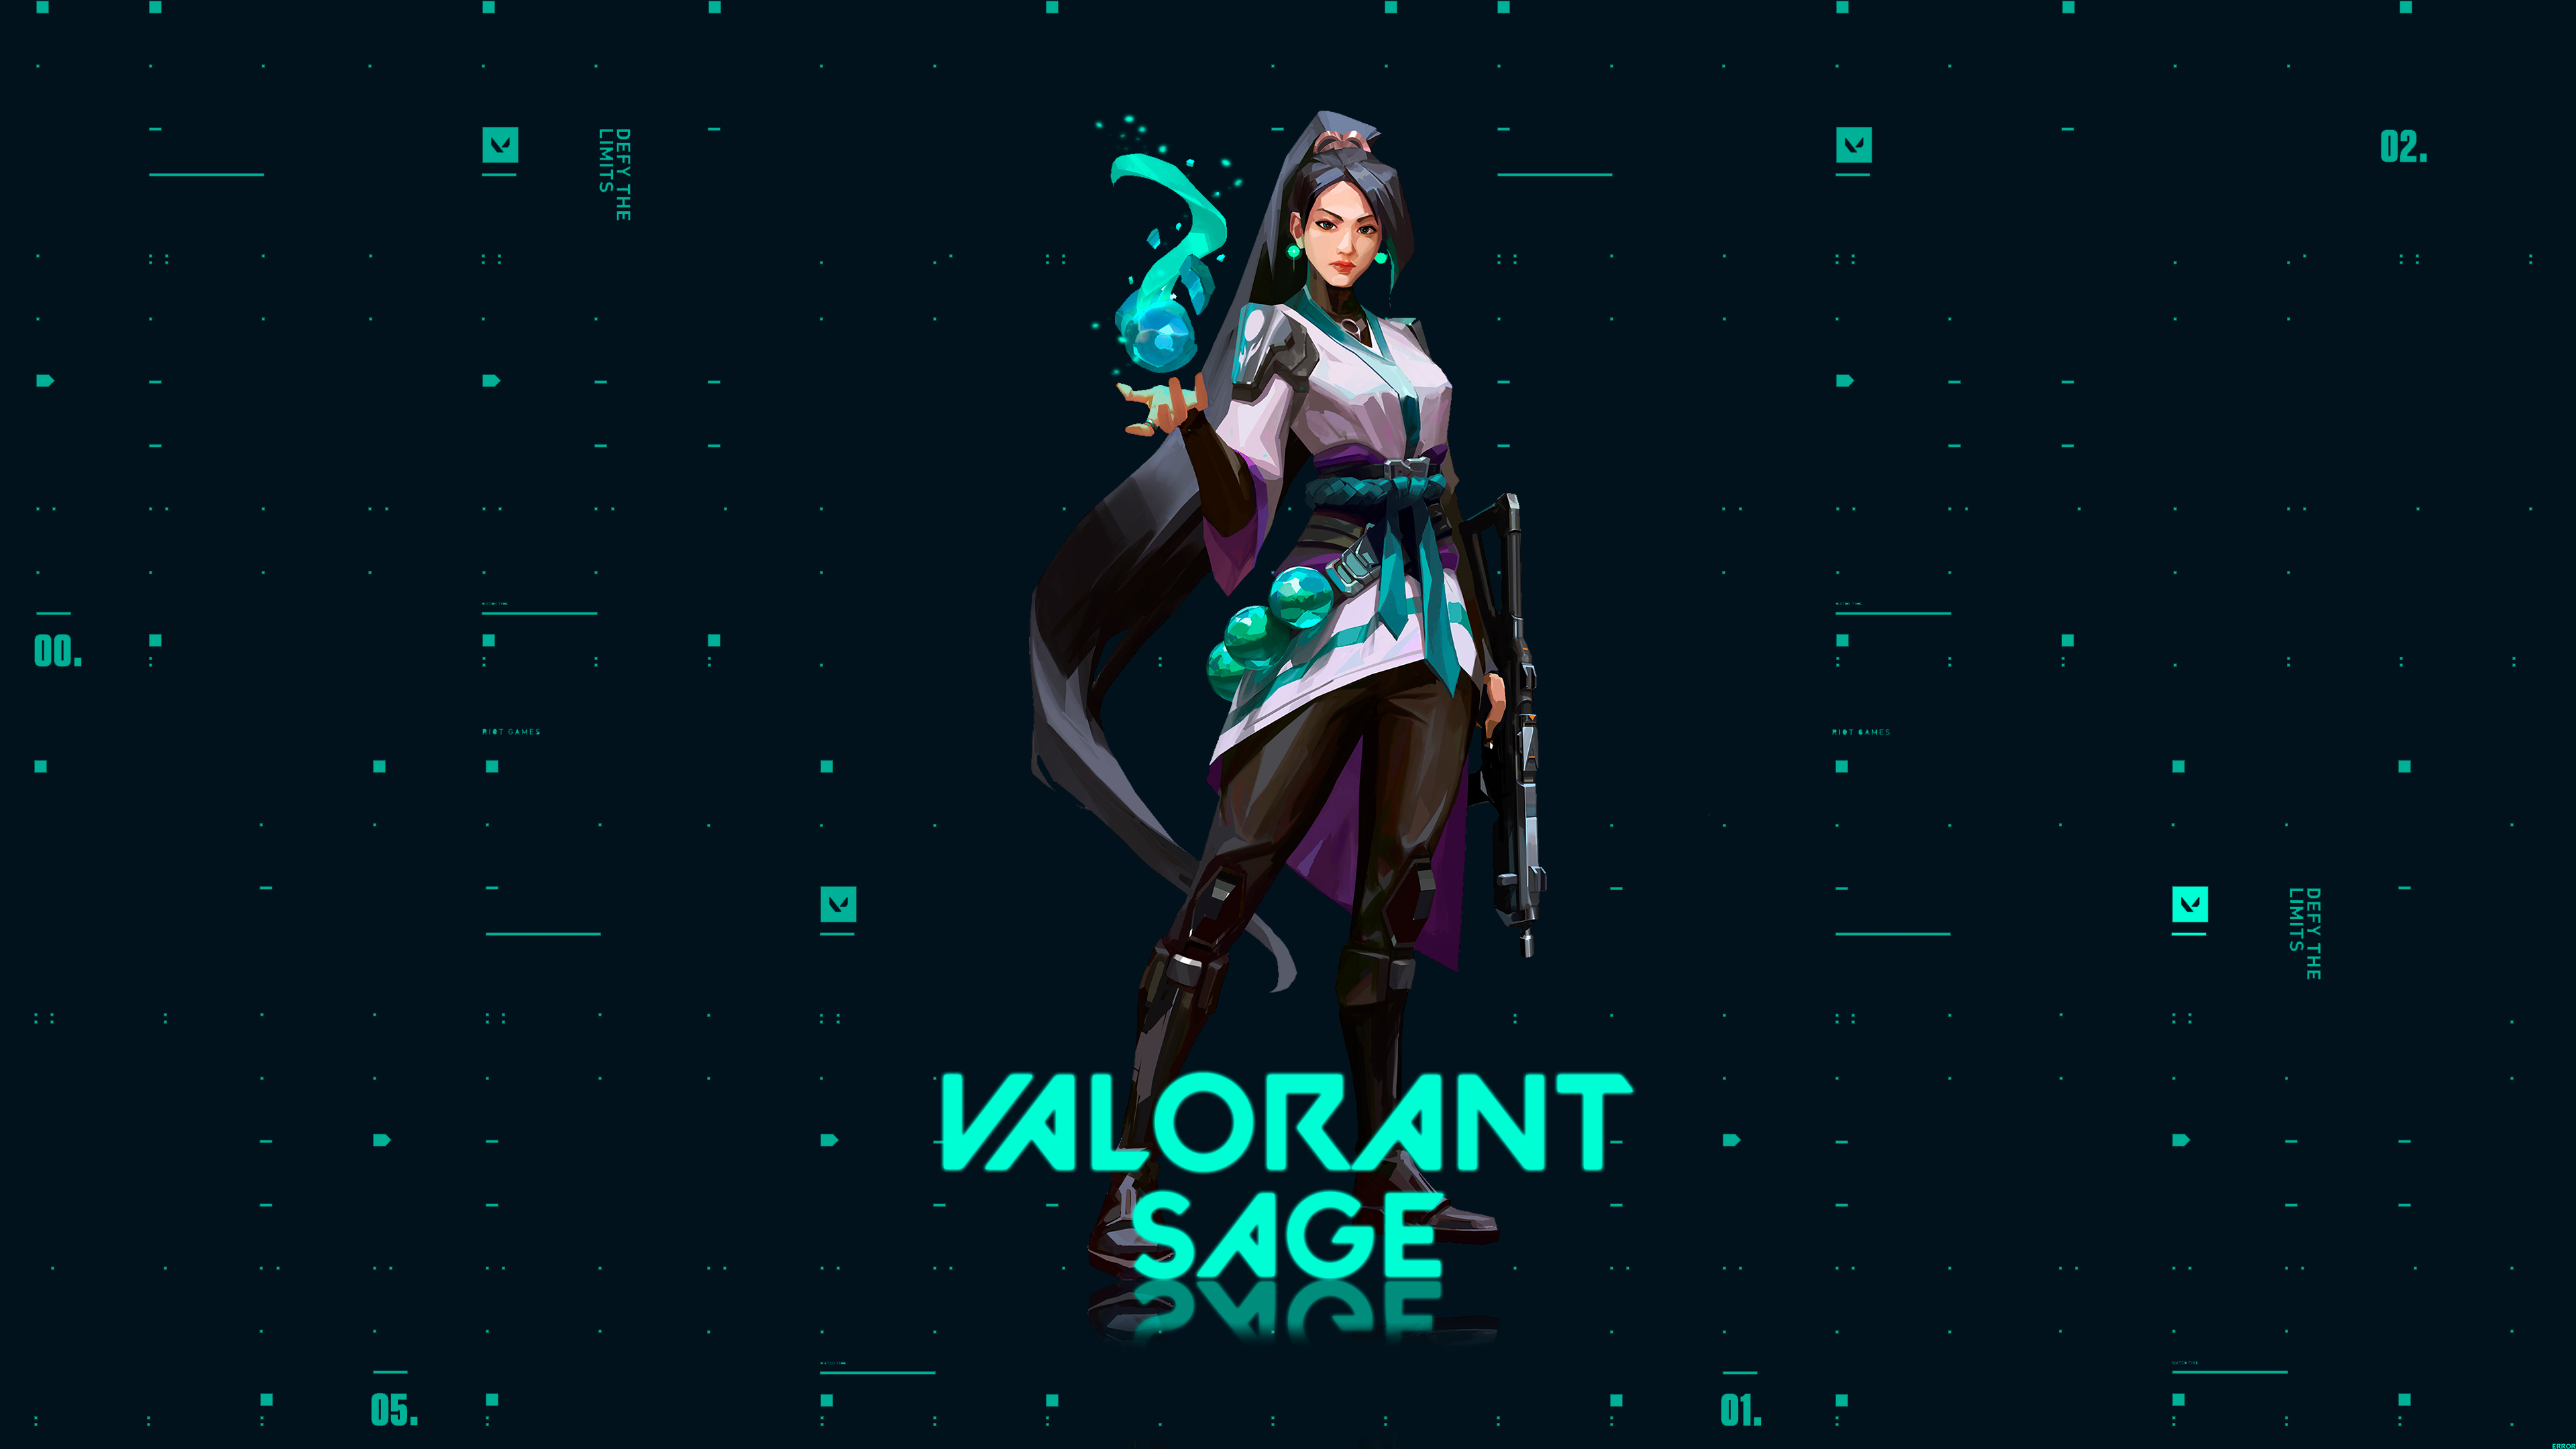 60 Sage Valorant HD Wallpapers and Backgrounds